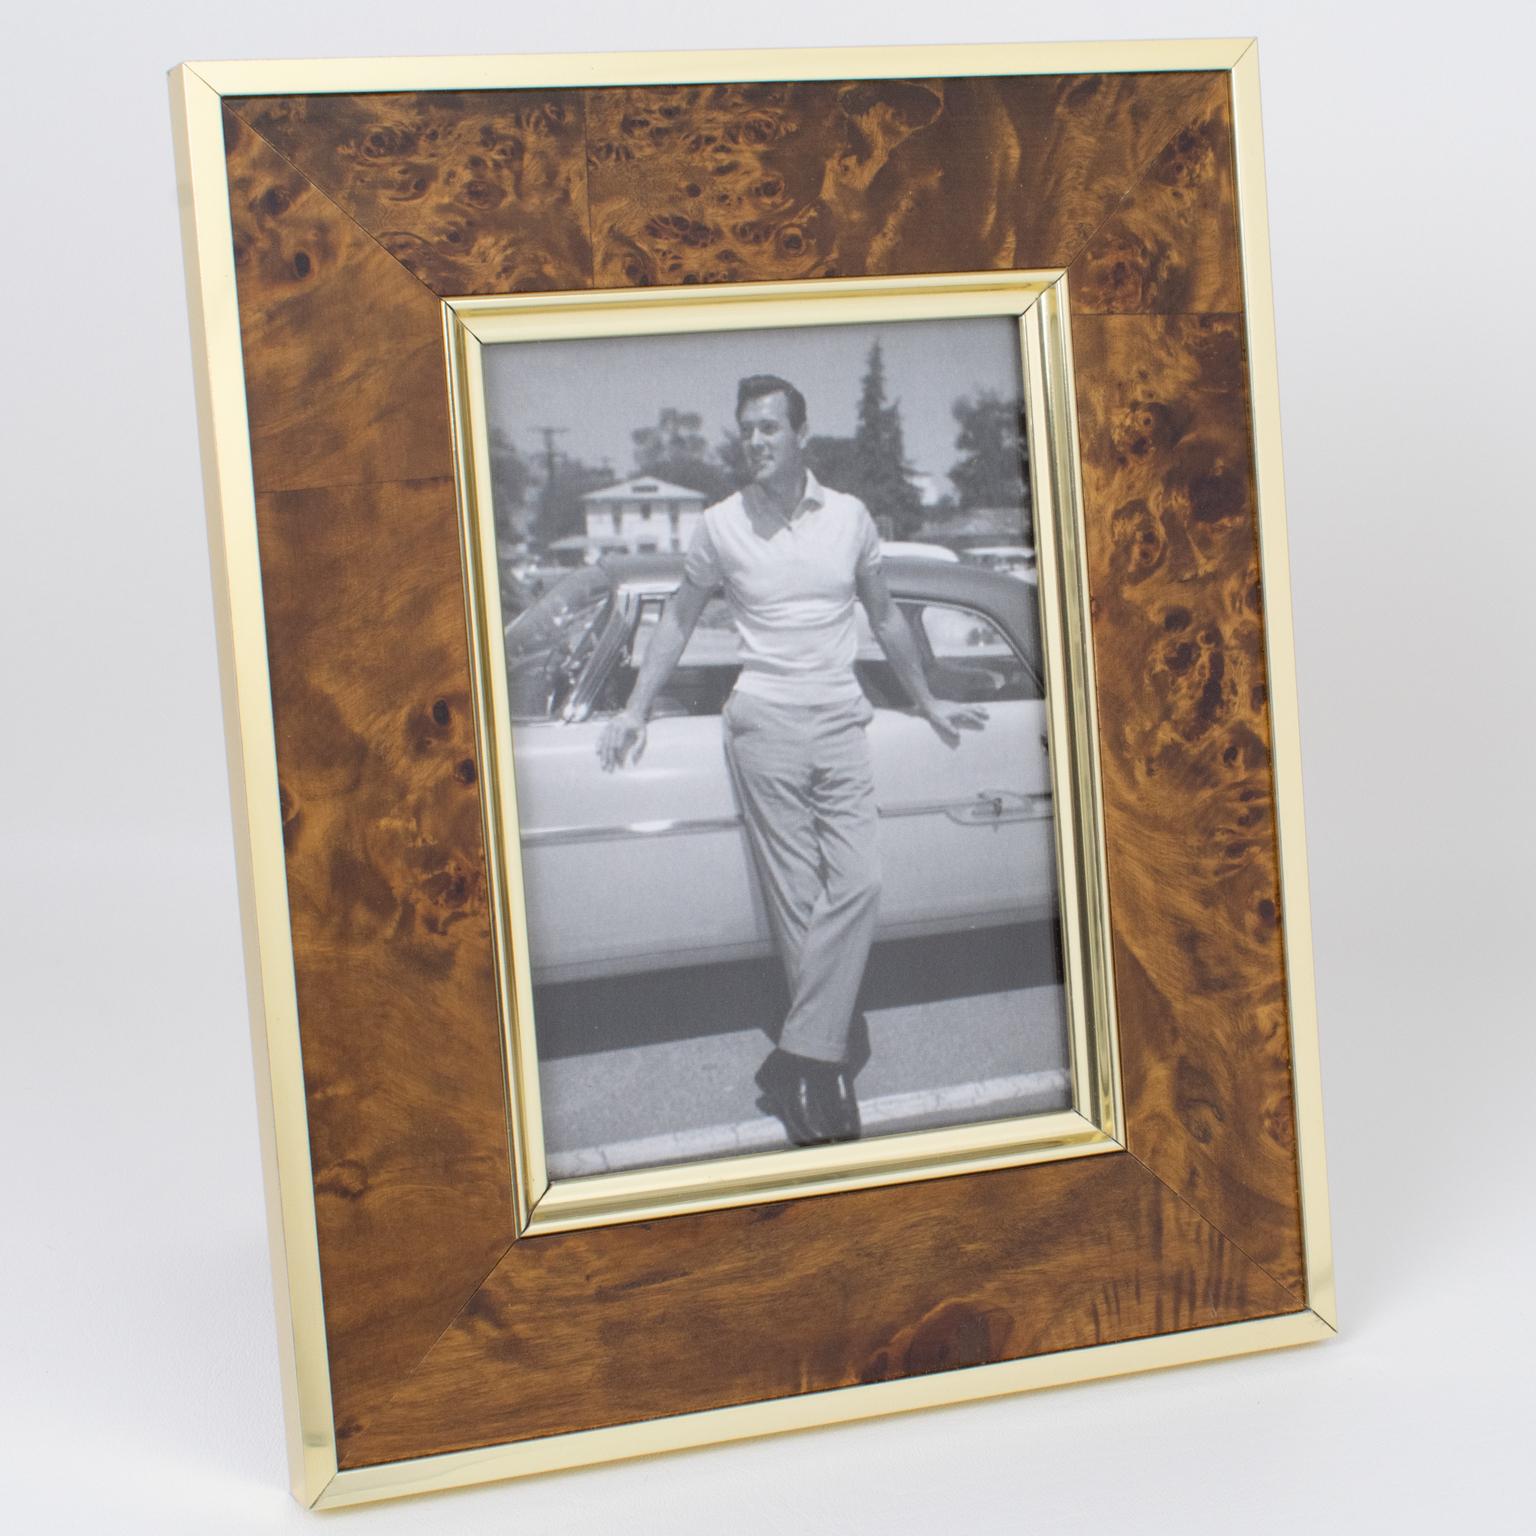 Montagnani Firenze, Italy, crafted this elegant picture photo frame in the 1970s. Its Mid-Century modernist design boasts a rectangular shape, with burl walnut wood geometric veneer complimented with polished gilded aluminum metal framings. The back